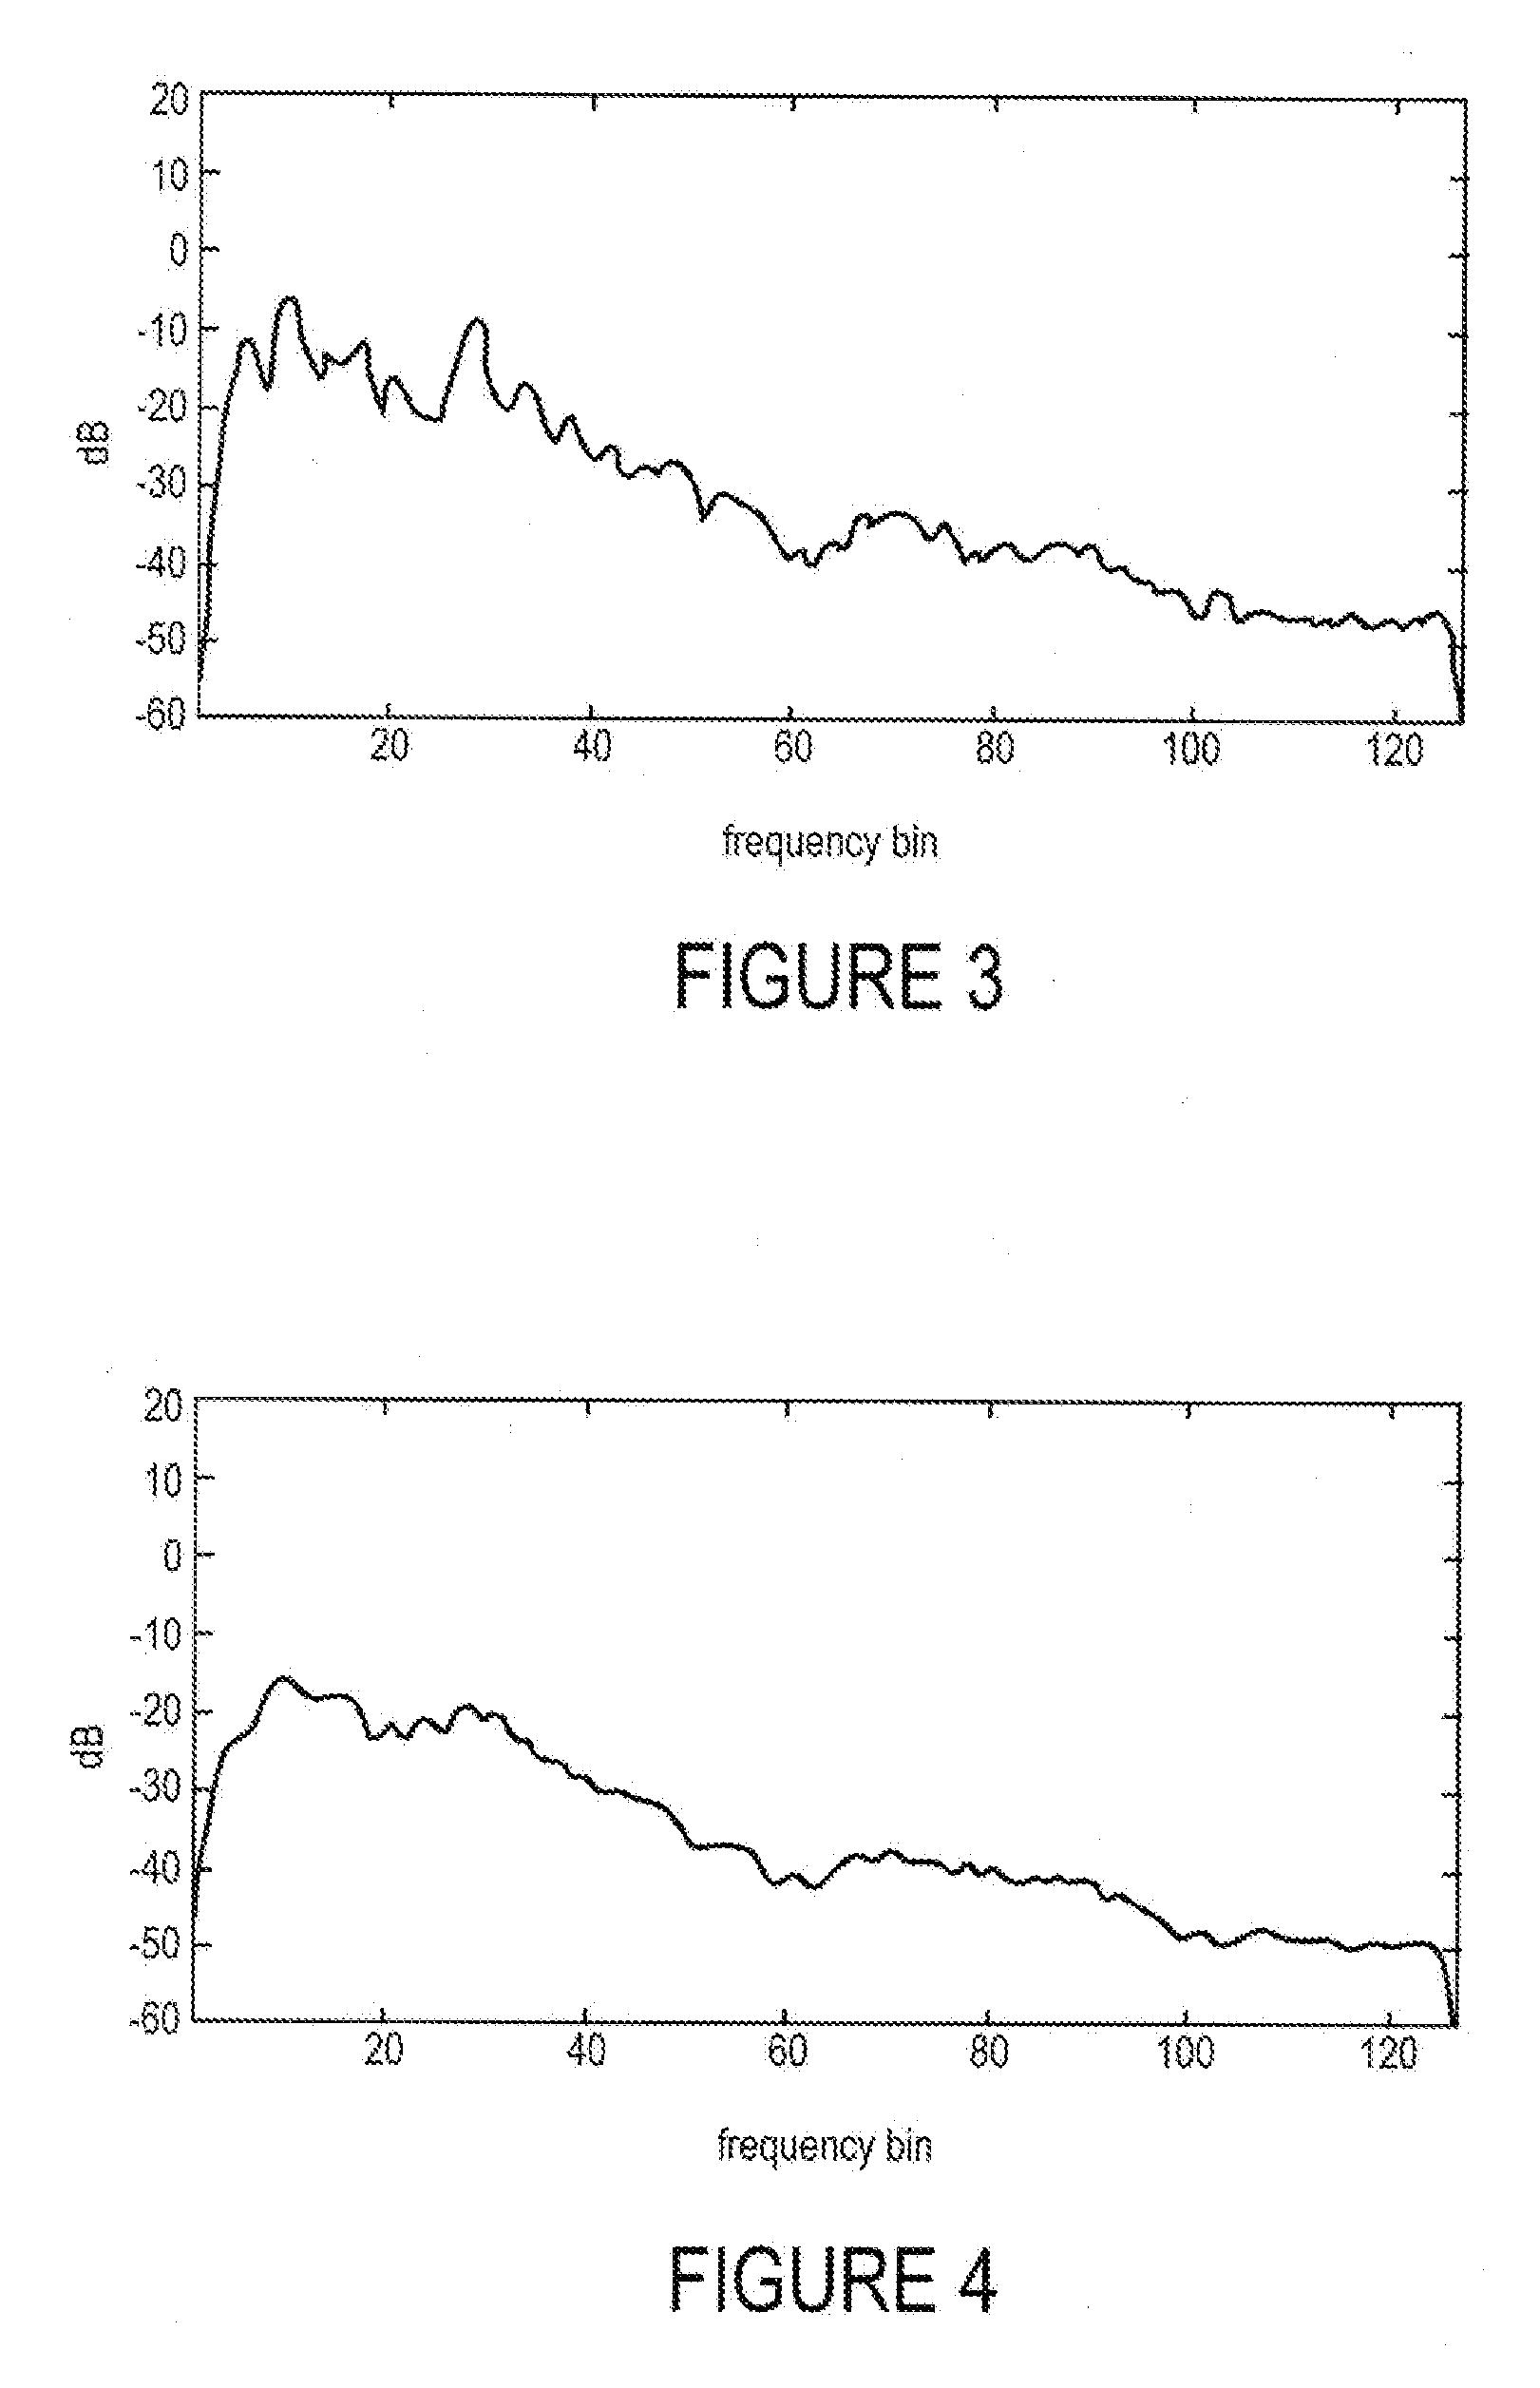 Noise reduction with integrated tonal noise reduction